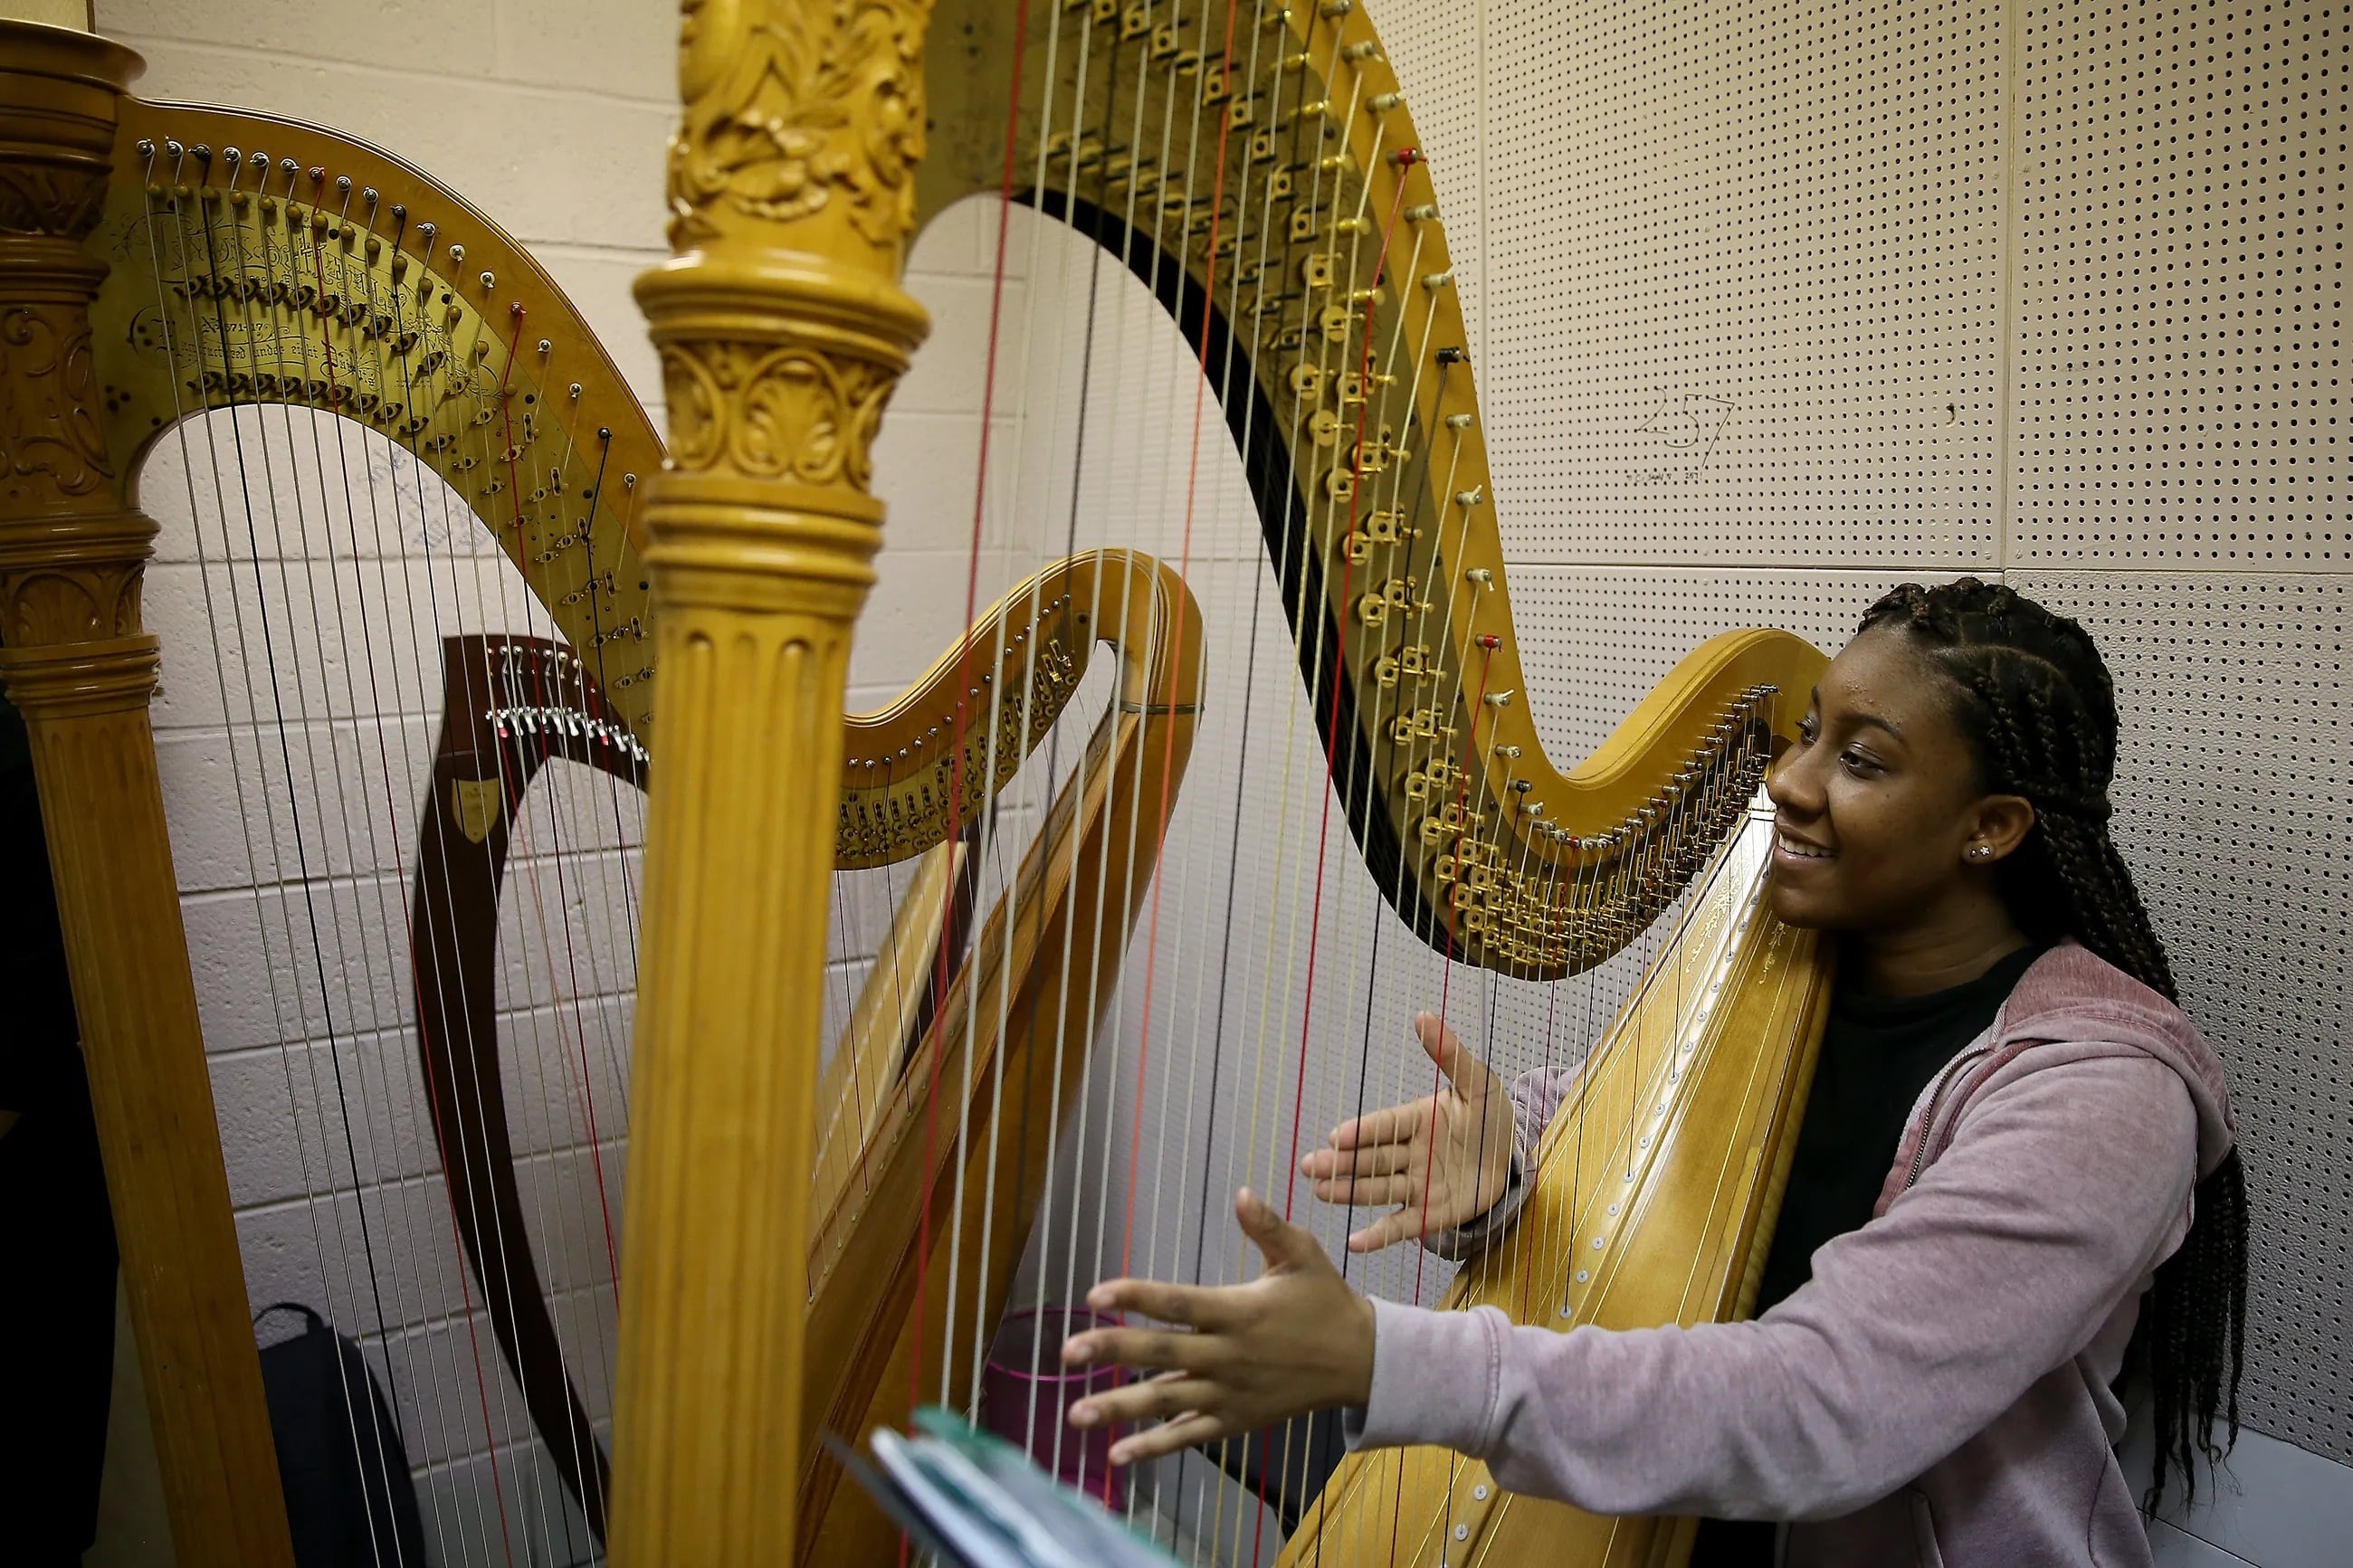 A rare instrument strikes a chord with Philly students